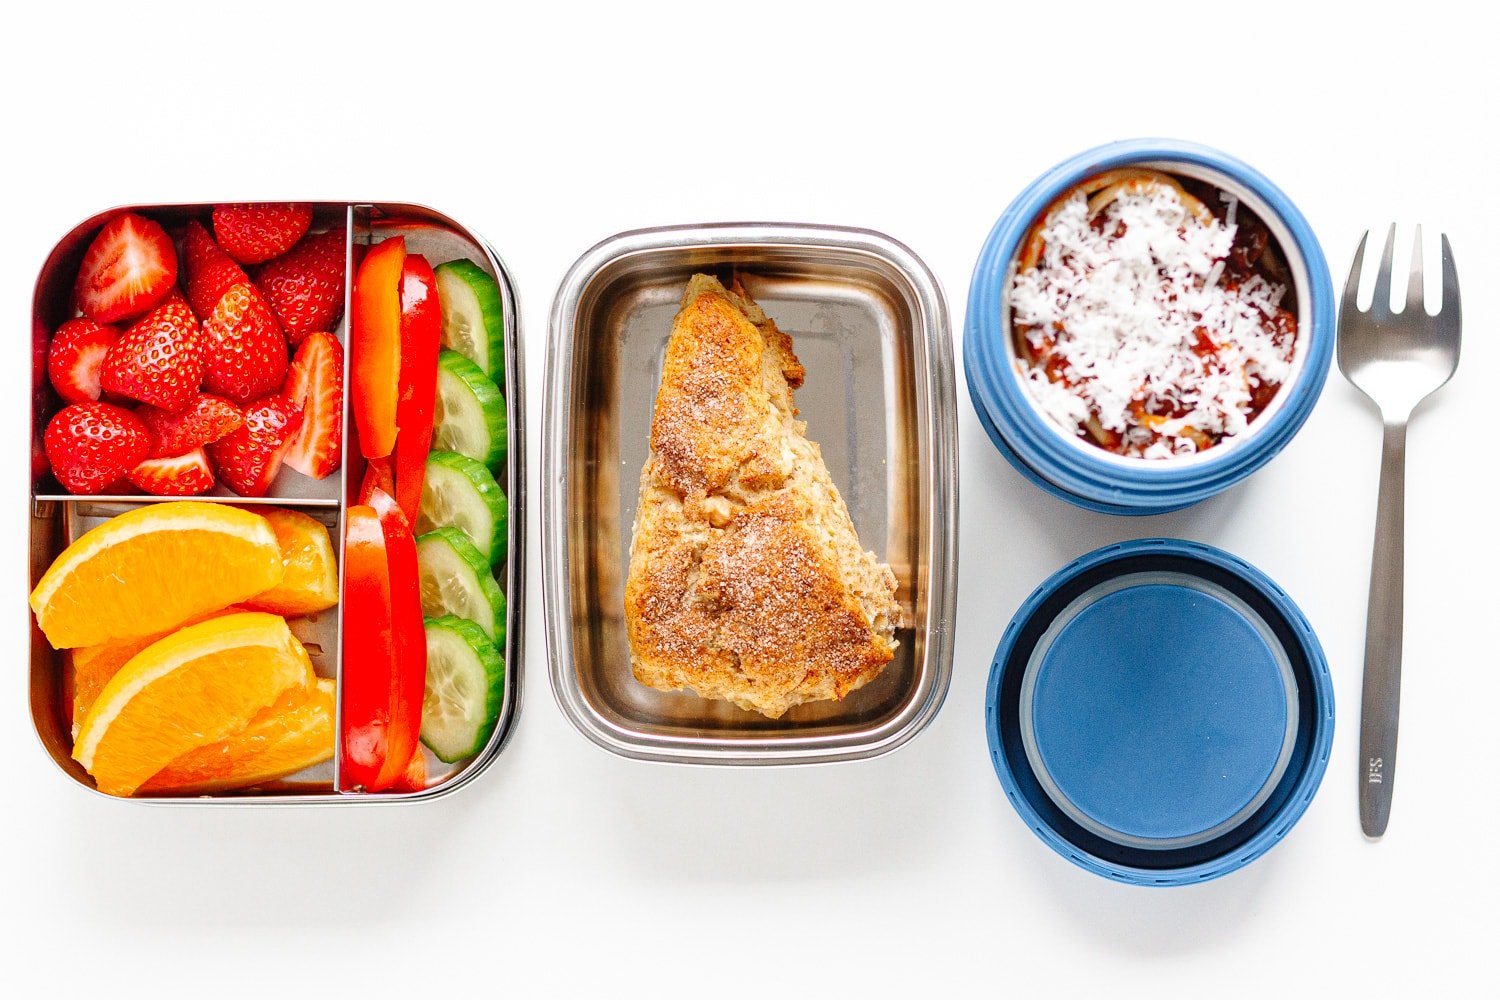 Packed school lunch containing a thermos with spaghetti bolognese, a container of mixed fruits and veggies and a container with an apple scone.